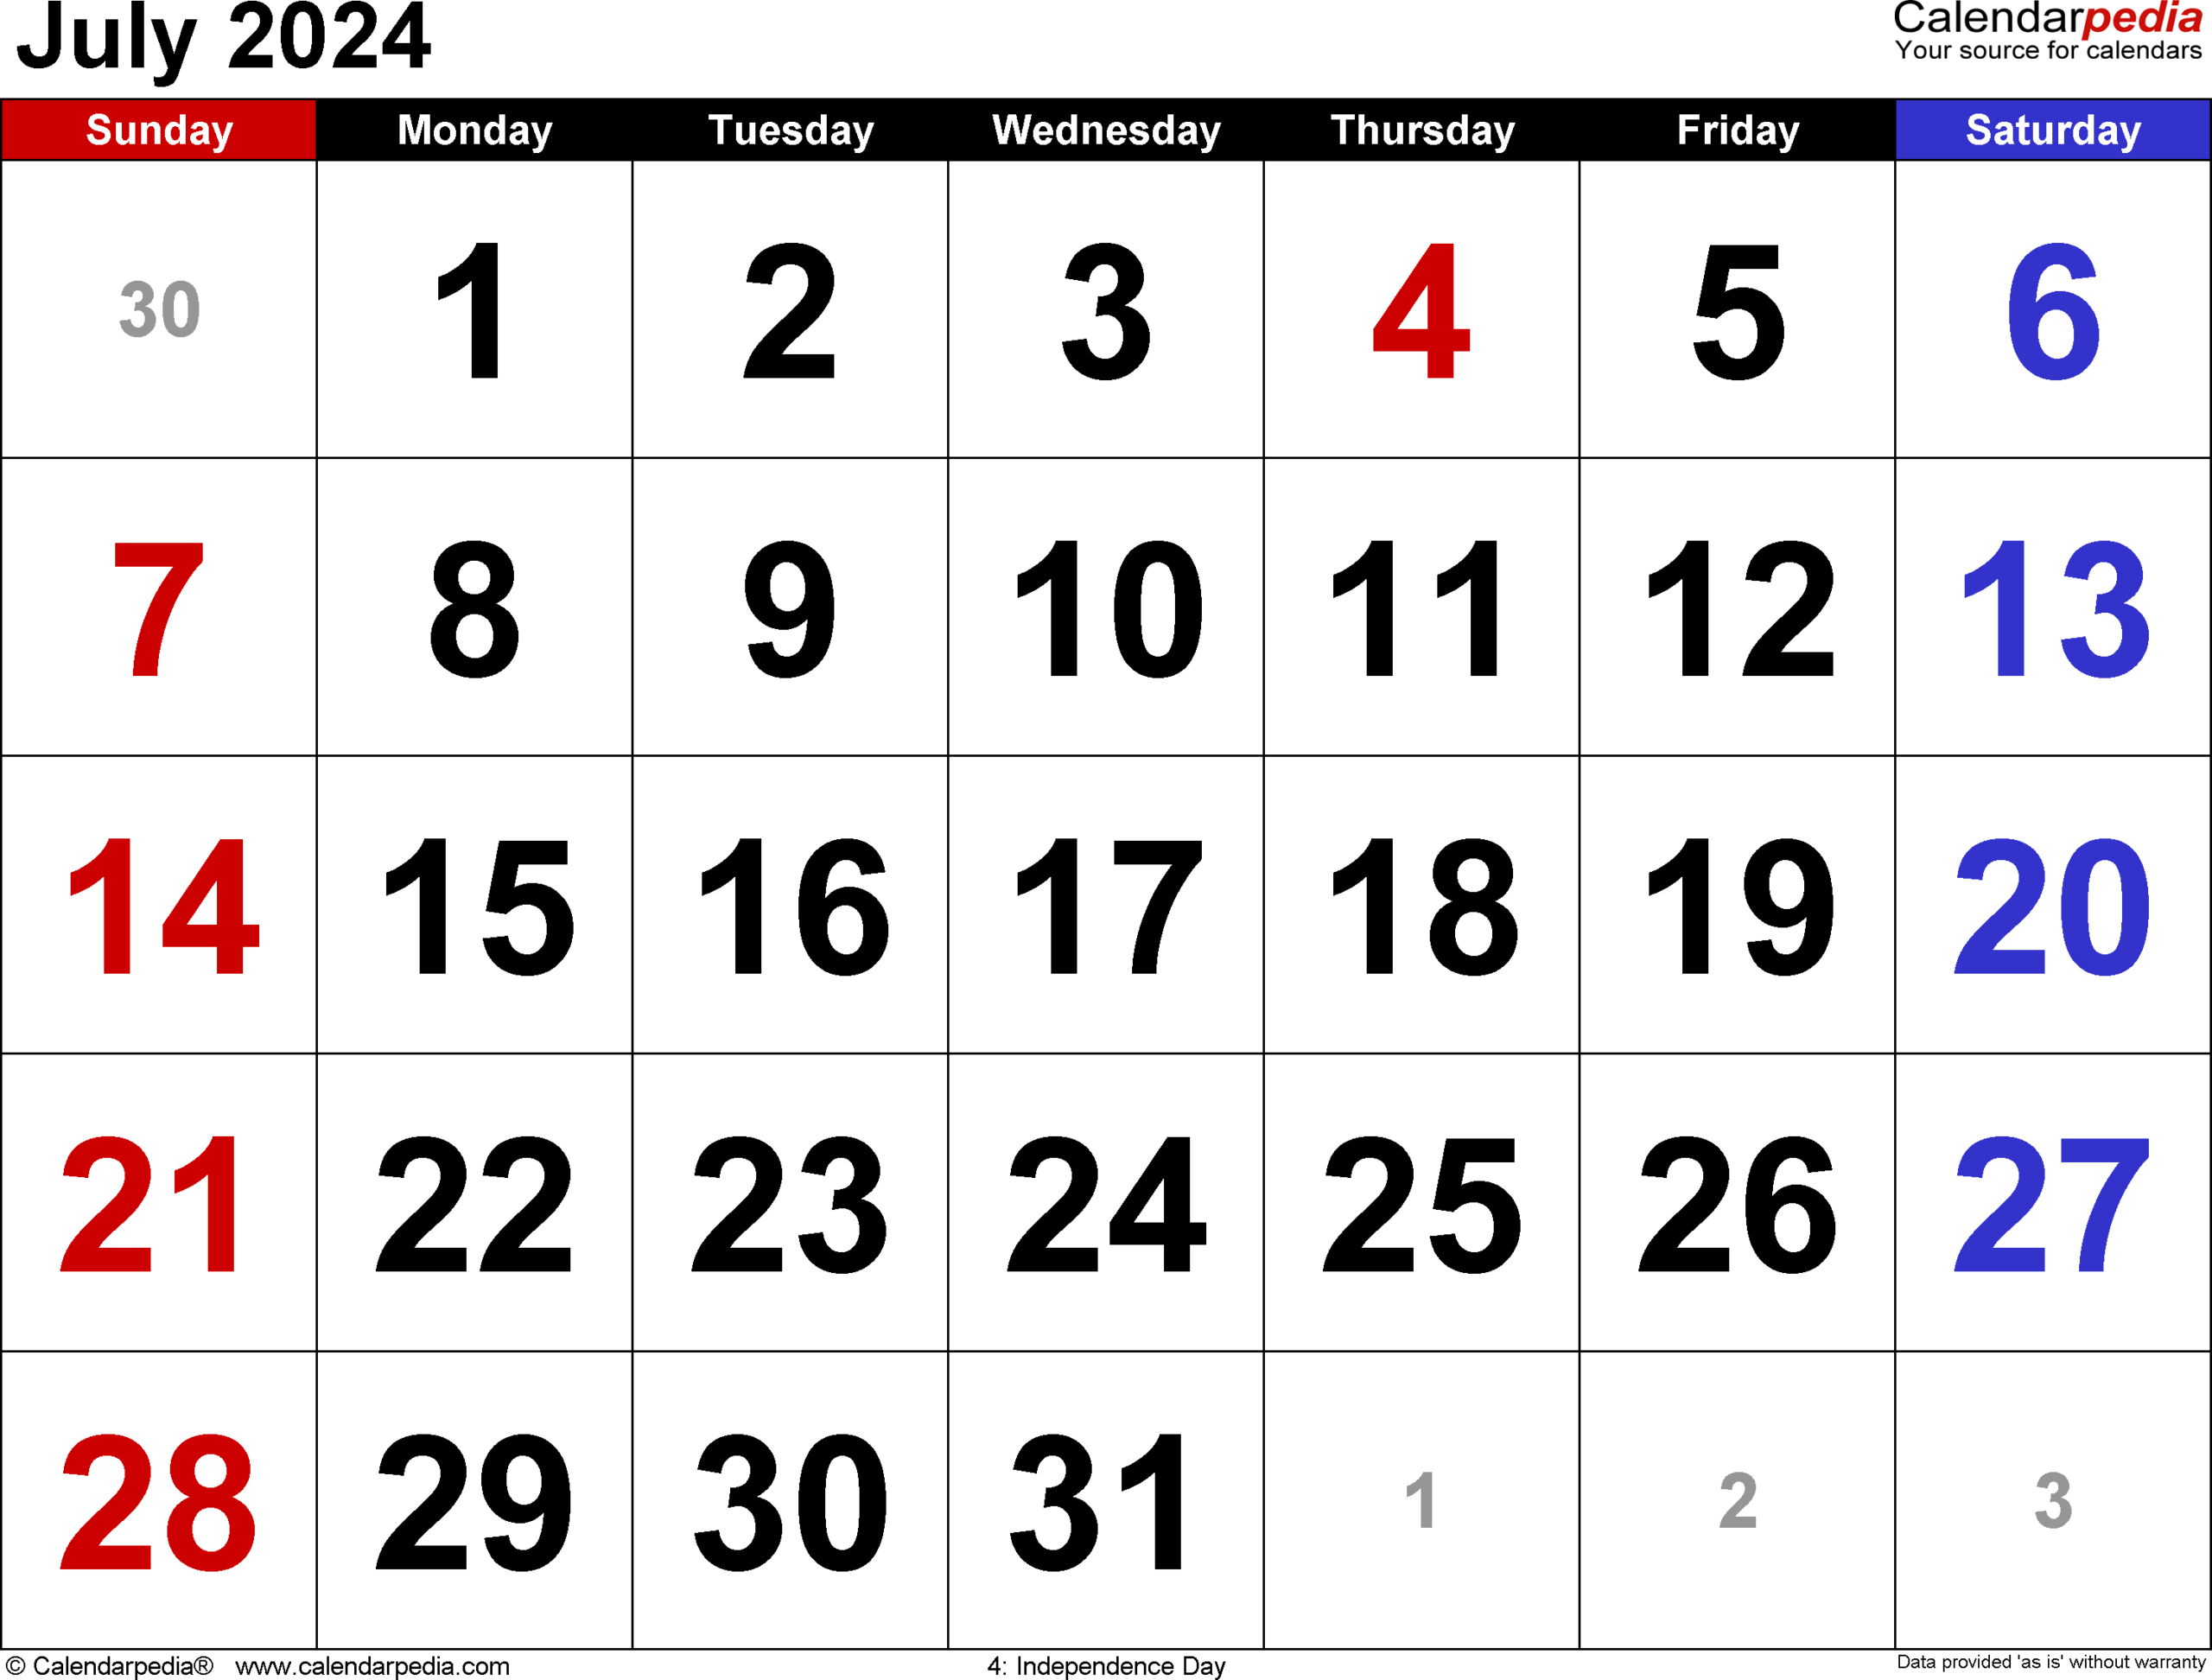 July 2024 Calendar | Templates For Word, Excel And Pdf | 6 July 2024 Calendar Printable